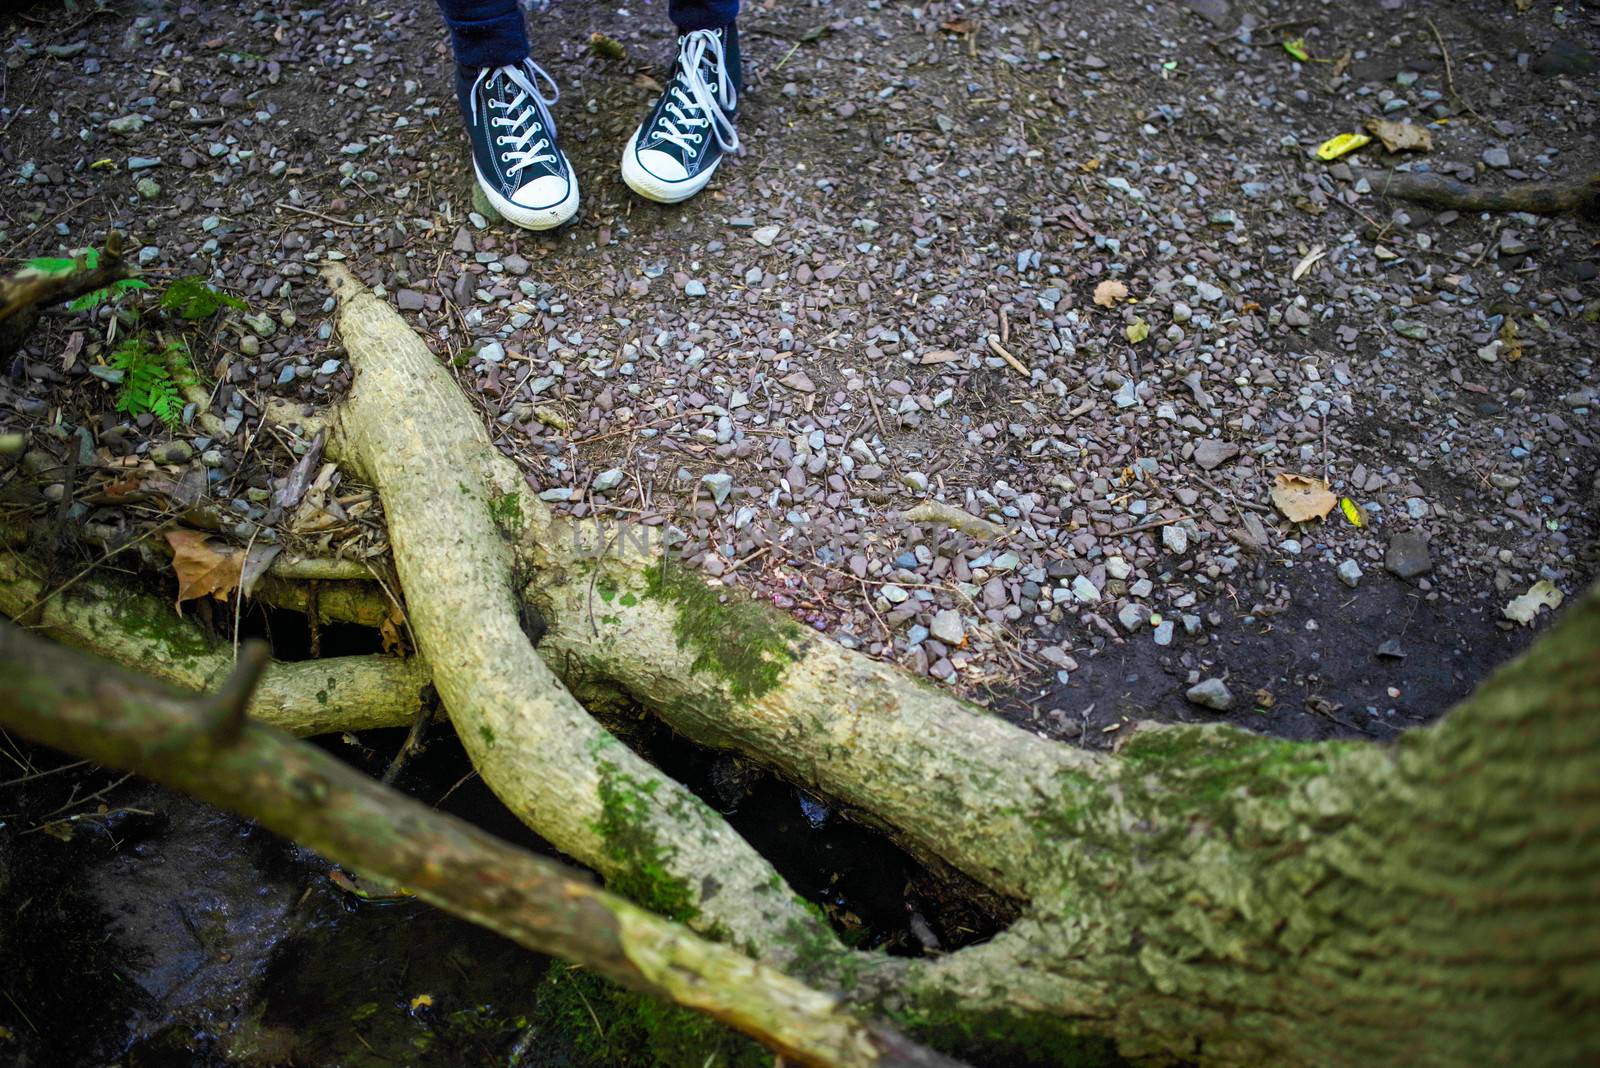 Feet with sneakers have uneasy stance in front of tree with moss blocking the hiking trail.ul stonnen